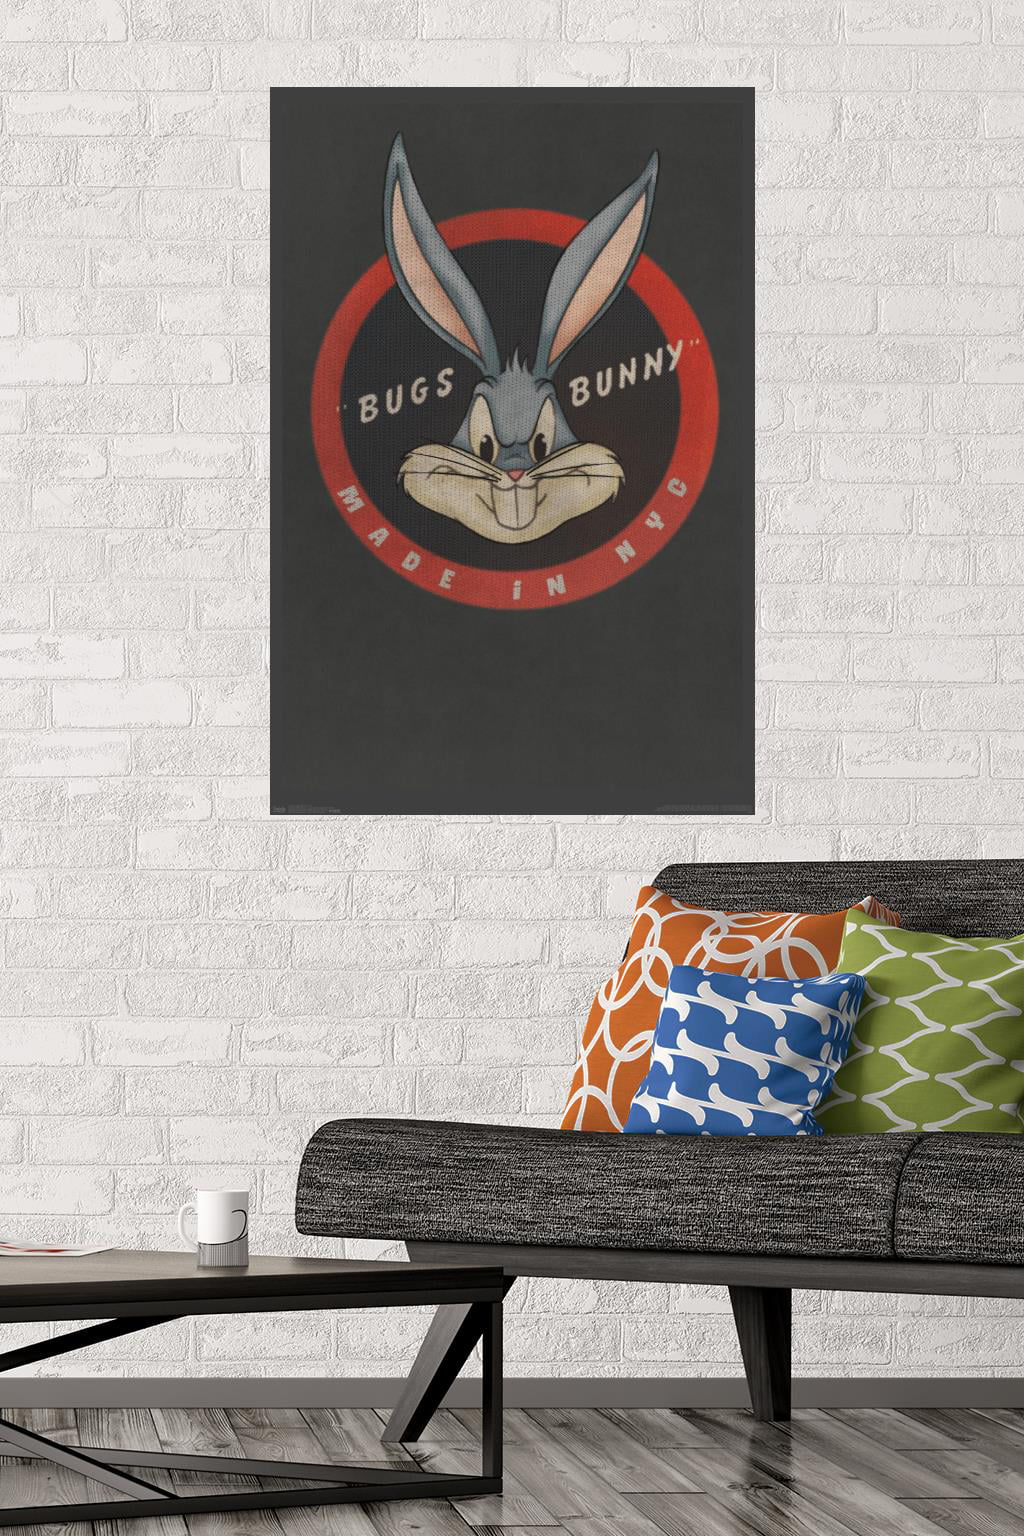 Looney Tunes - Bugs Bunny - NYC Wall Poster, 22.375